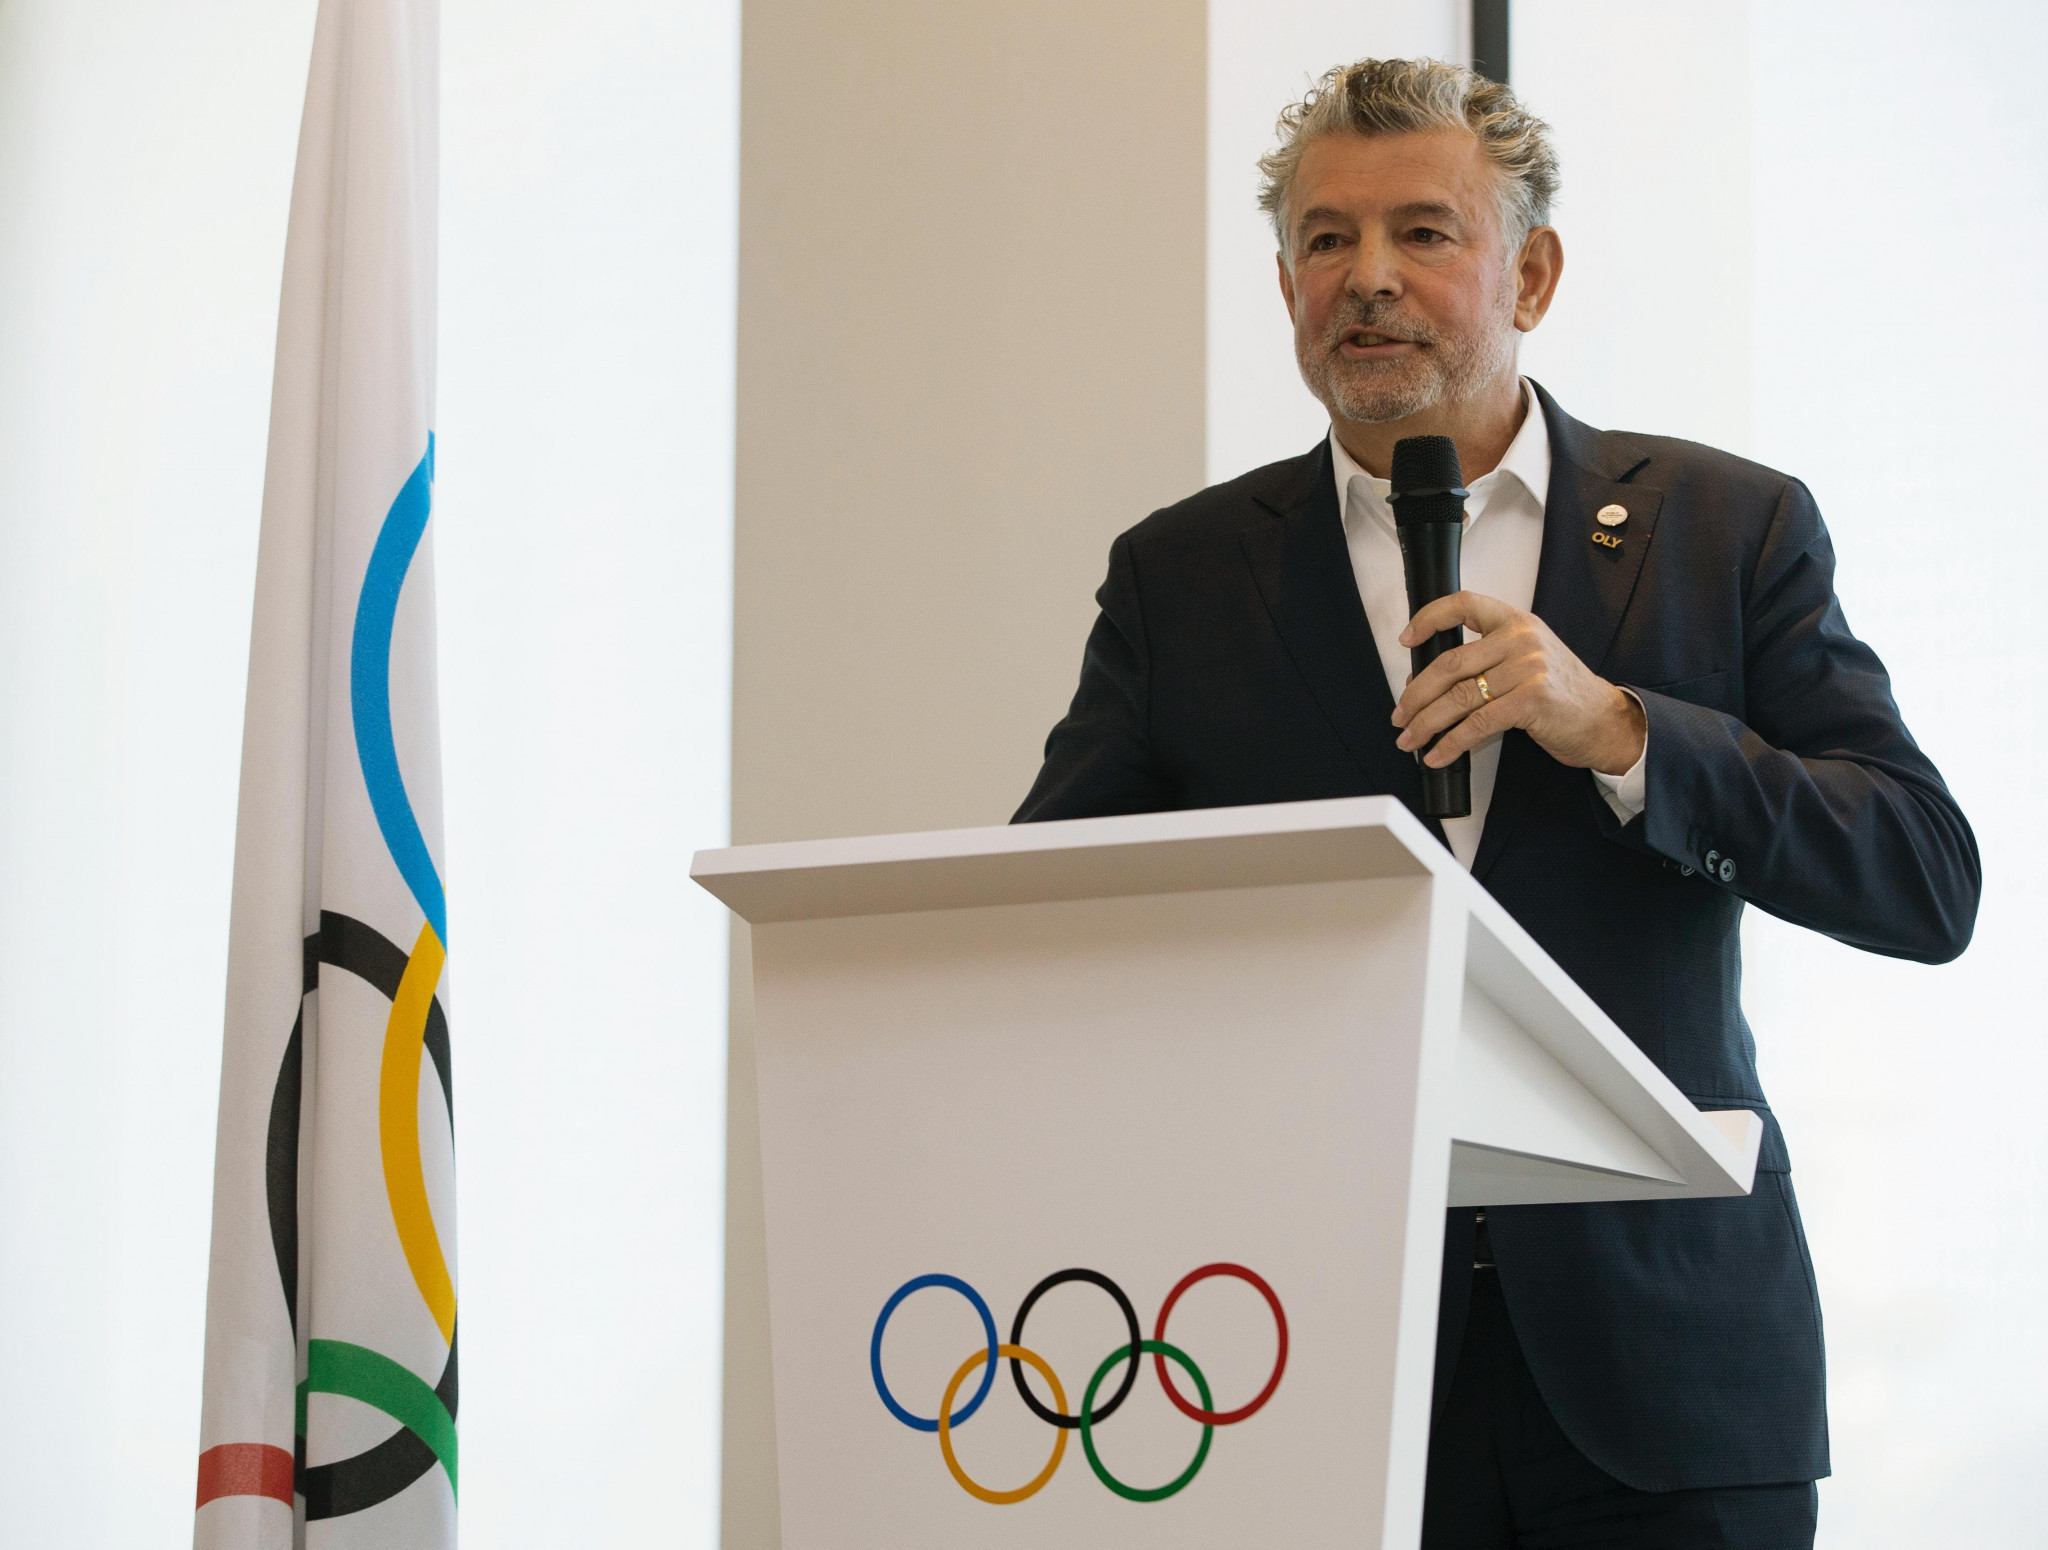 Bouzou re-elected for third term as President of World Olympians Association